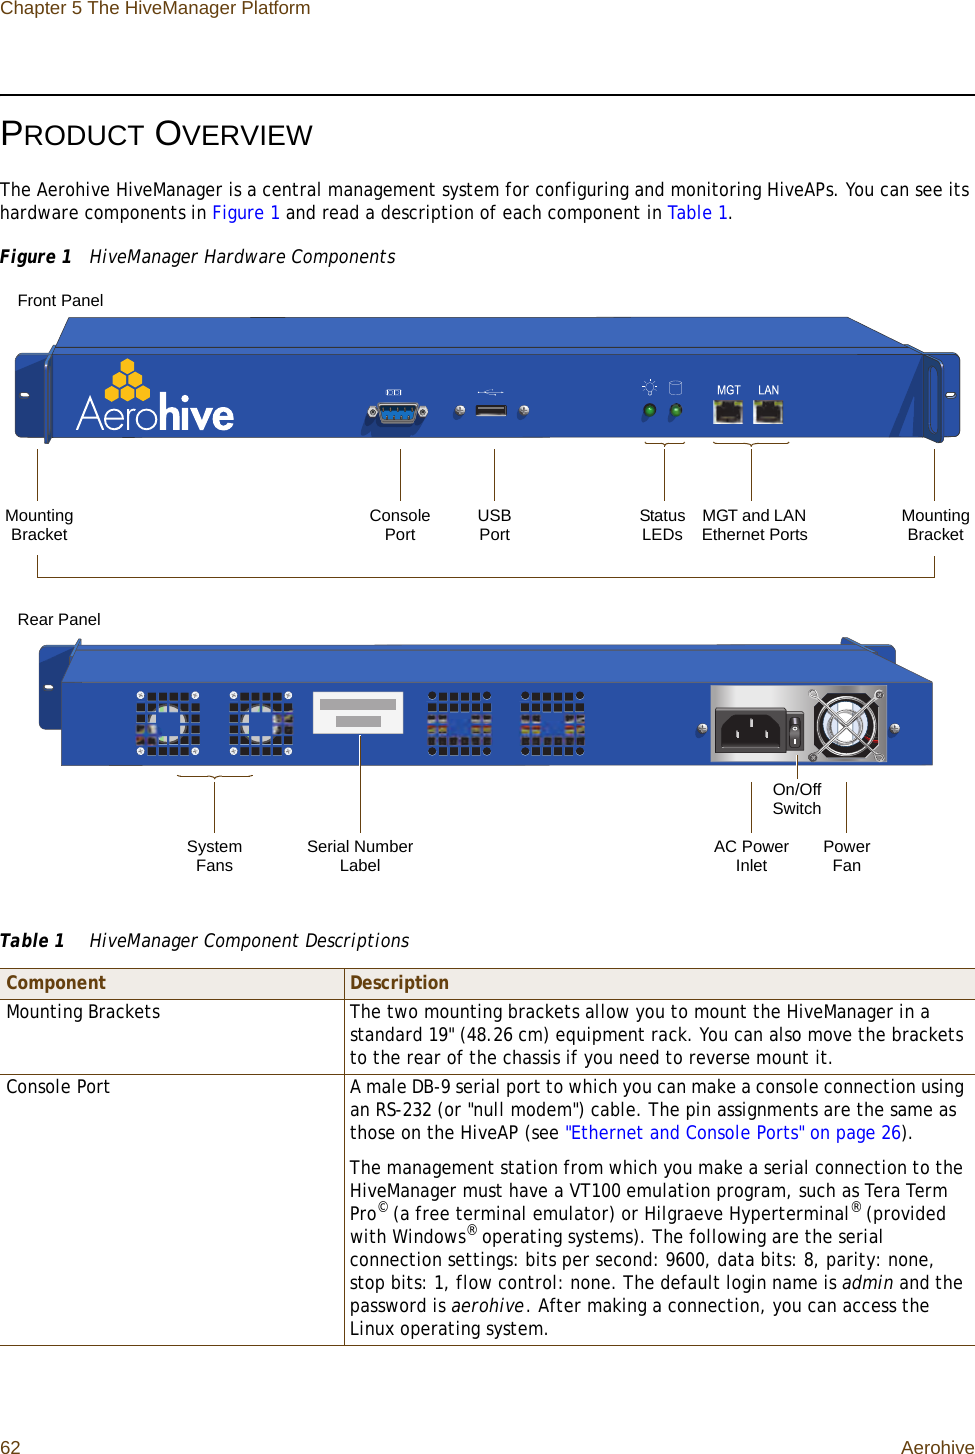 Chapter 5 The HiveManager Platform62 AerohivePRODUCT OVERVIEWThe Aerohive HiveManager is a central management system for configuring and monitoring HiveAPs. You can see its hardware components in Figure 1 and read a description of each component in Table 1.Figure 1  HiveManager Hardware ComponentsTable 1  HiveManager Component DescriptionsComponent DescriptionMounting Brackets The two mounting brackets allow you to mount the HiveManager in a standard 19&quot; (48.26 cm) equipment rack. You can also move the brackets to the rear of the chassis if you need to reverse mount it.Console Port A male DB-9 serial port to which you can make a console connection using an RS-232 (or &quot;null modem&quot;) cable. The pin assignments are the same as those on the HiveAP (see &quot;Ethernet and Console Ports&quot; on page 26).The management station from which you make a serial connection to the HiveManager must have a VT100 emulation program, such as Tera Term Pro© (a free terminal emulator) or Hilgraeve Hyperterminal® (provided with Windows® operating systems). The following are the serial connection settings: bits per second: 9600, data bits: 8, parity: none, stop bits: 1, flow control: none. The default login name is admin and the password is aerohive. After making a connection, you can access the Linux operating system.USB PortConsole Port Status LEDsMounting Bracket MGT and LAN Ethernet Ports Mounting BracketPower FanSystem Fans AC Power InletSerial Number LabelOn/Off SwitchFront PanelRear Panel